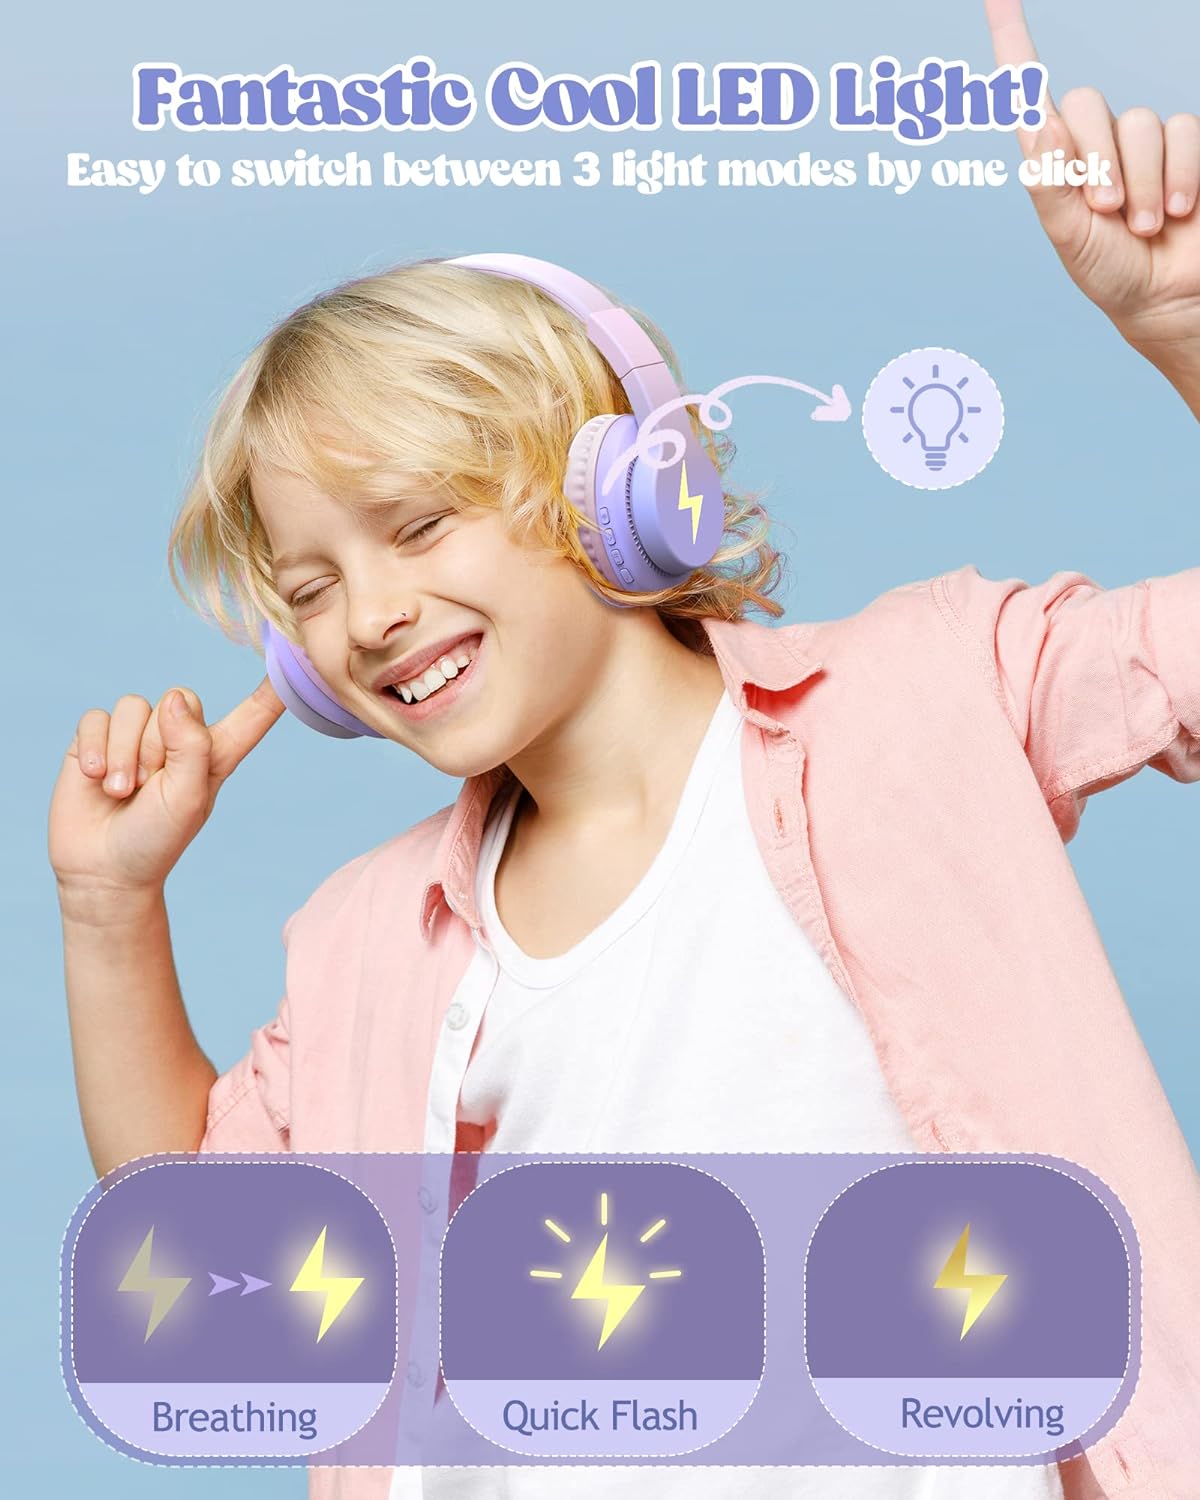 Kids Bluetooth Headphones, Colorful Wireless Over Ear Headset with LED Lights, Built-in Mic, 45H Playtime, 85dB/94dB Volume Limited Headphones for Boys Girls iPad Tablet School Airplane (Blue)